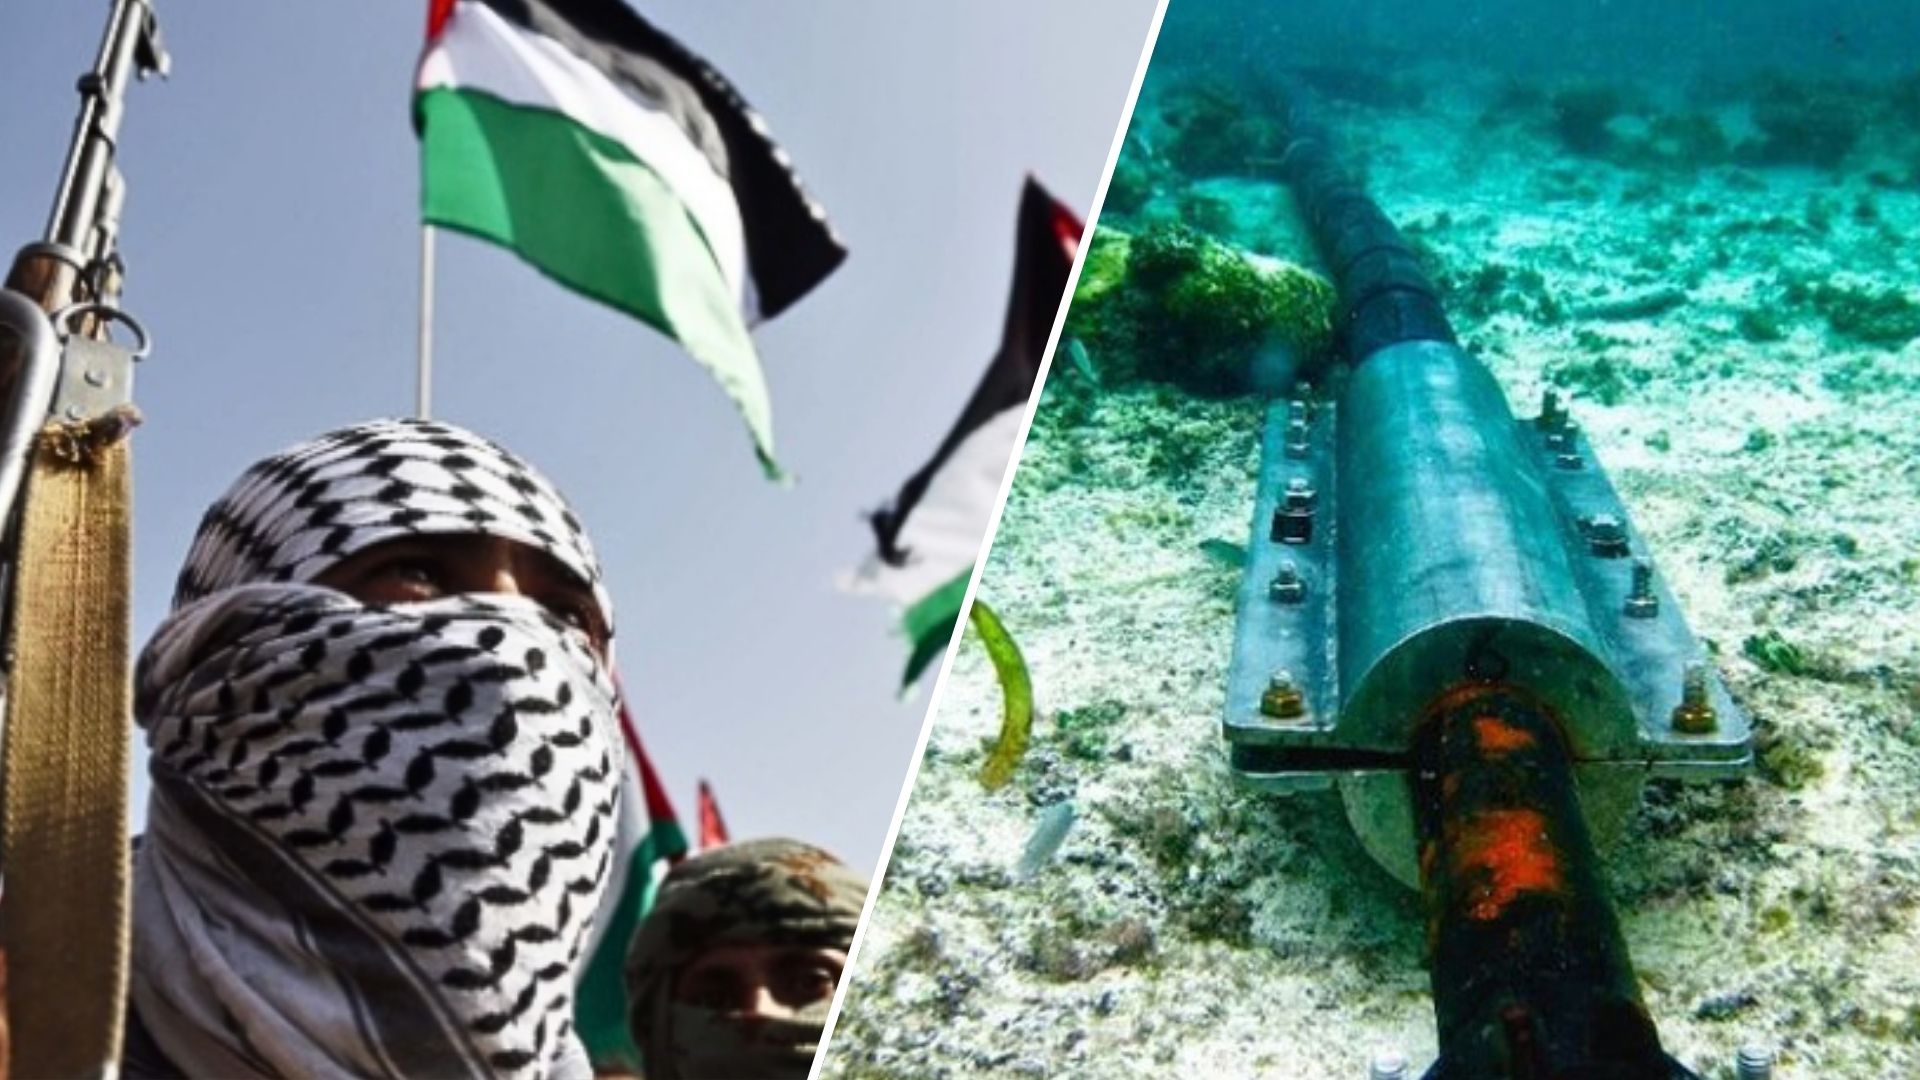 In the Red Sea, the Houthis cut global internet cables, causing severe damage.